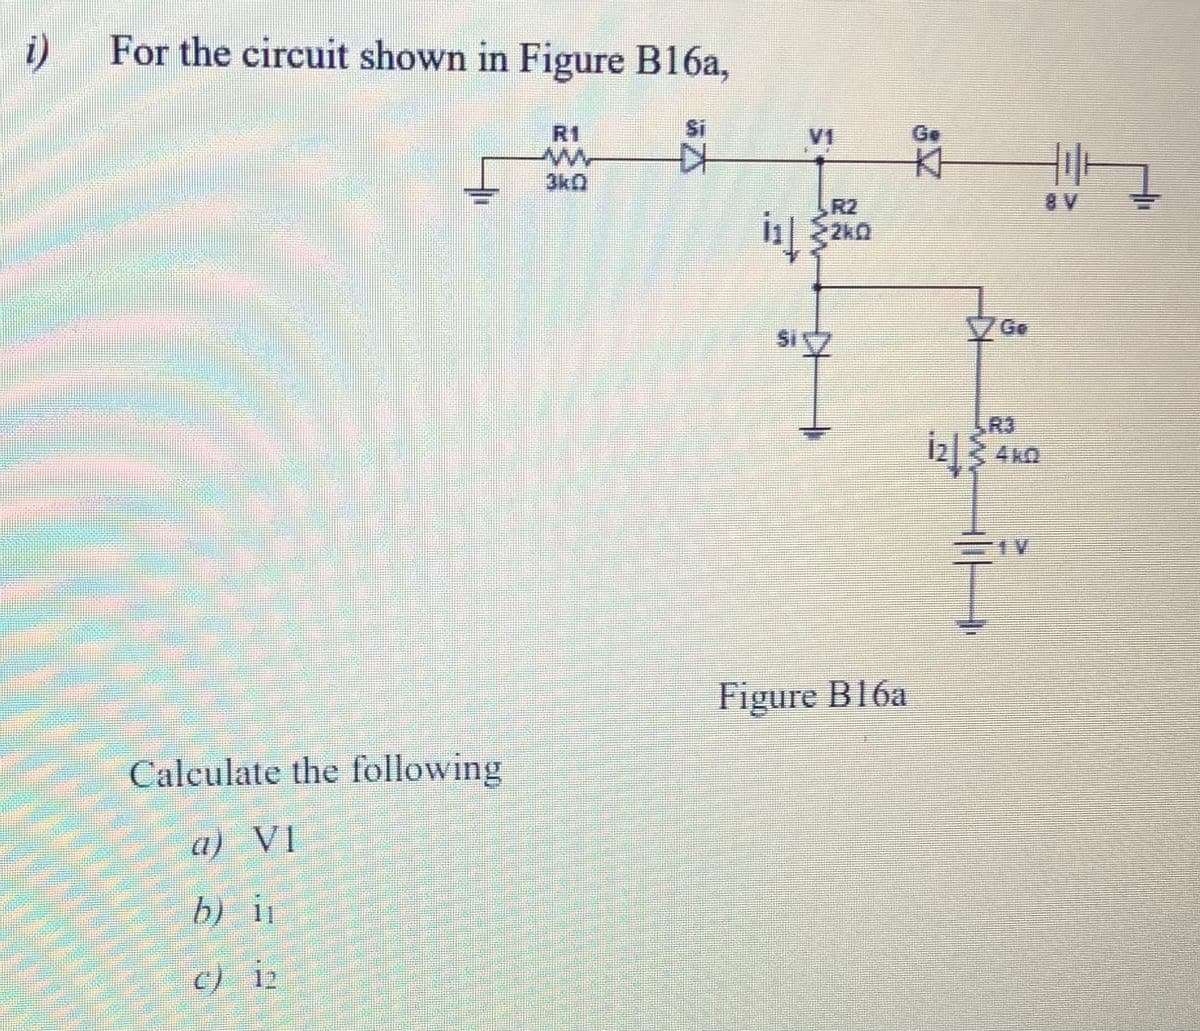 i)
For the circuit shown in Figure B16a,
R1
Si
V1
Ge
3k0
R2
i可
2kQ
SIZ
R3
4kO
Figure B16a
Calculate the following
a) VI
b) i
c) 12
